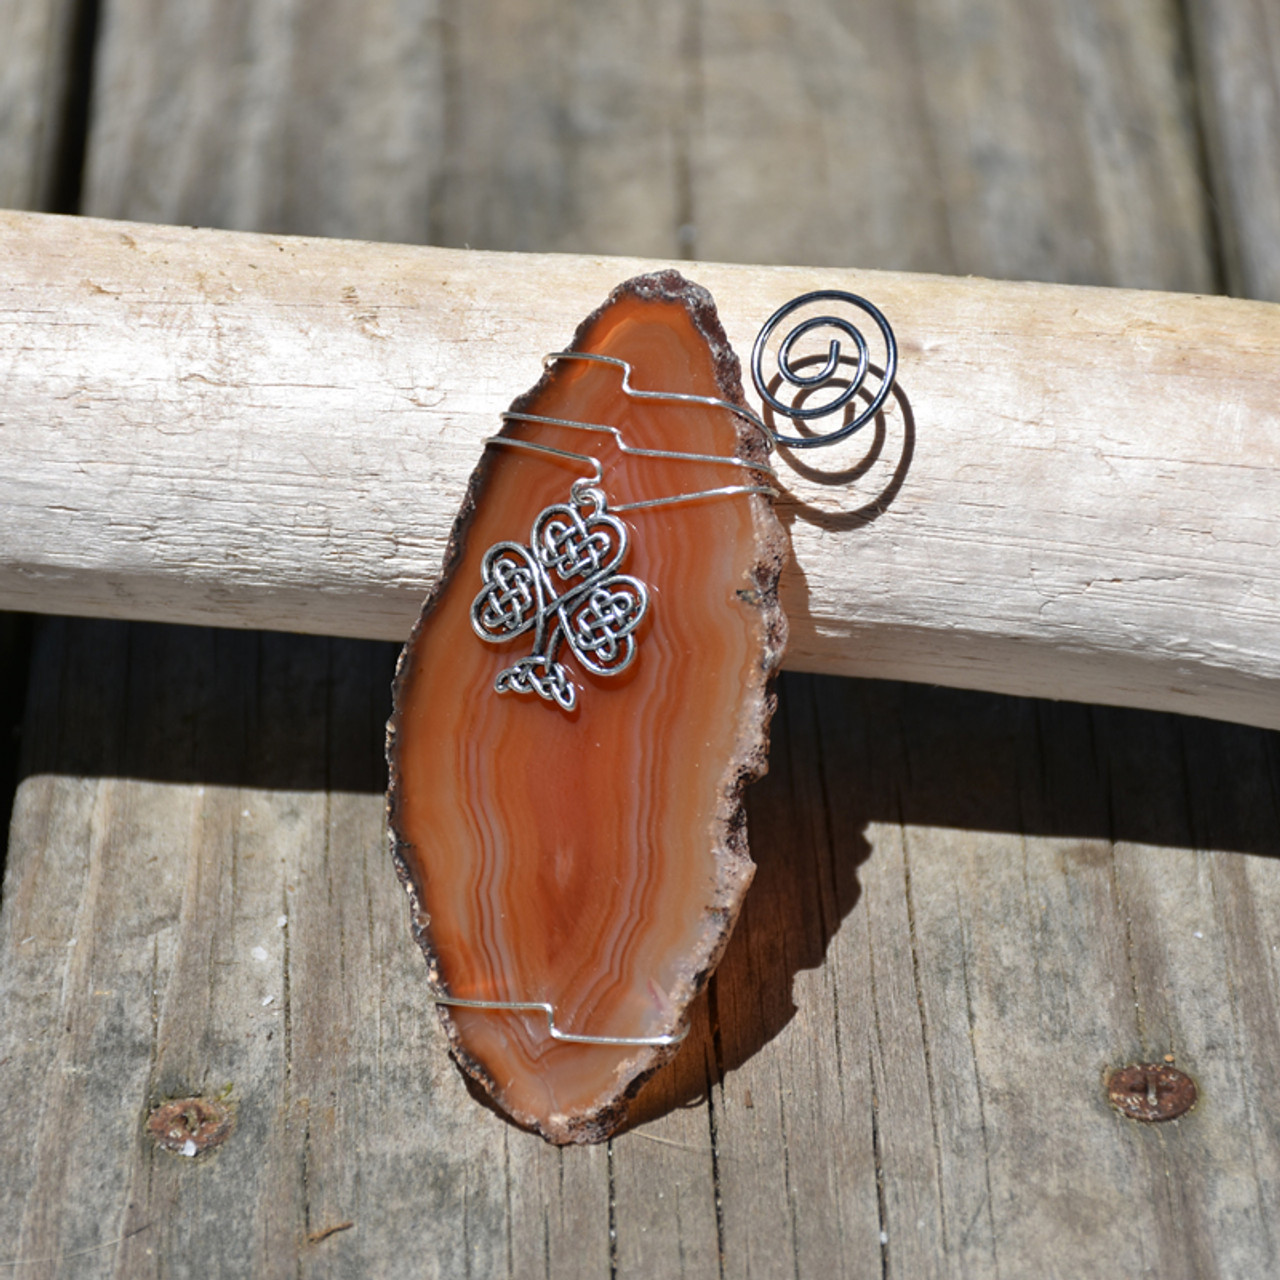 Celtic Knot Shamrock Charm on a Wire Wrapped Agate Slice Ornament for St Patrick's Day - Choose Your Agate Slice Color- Made to Order